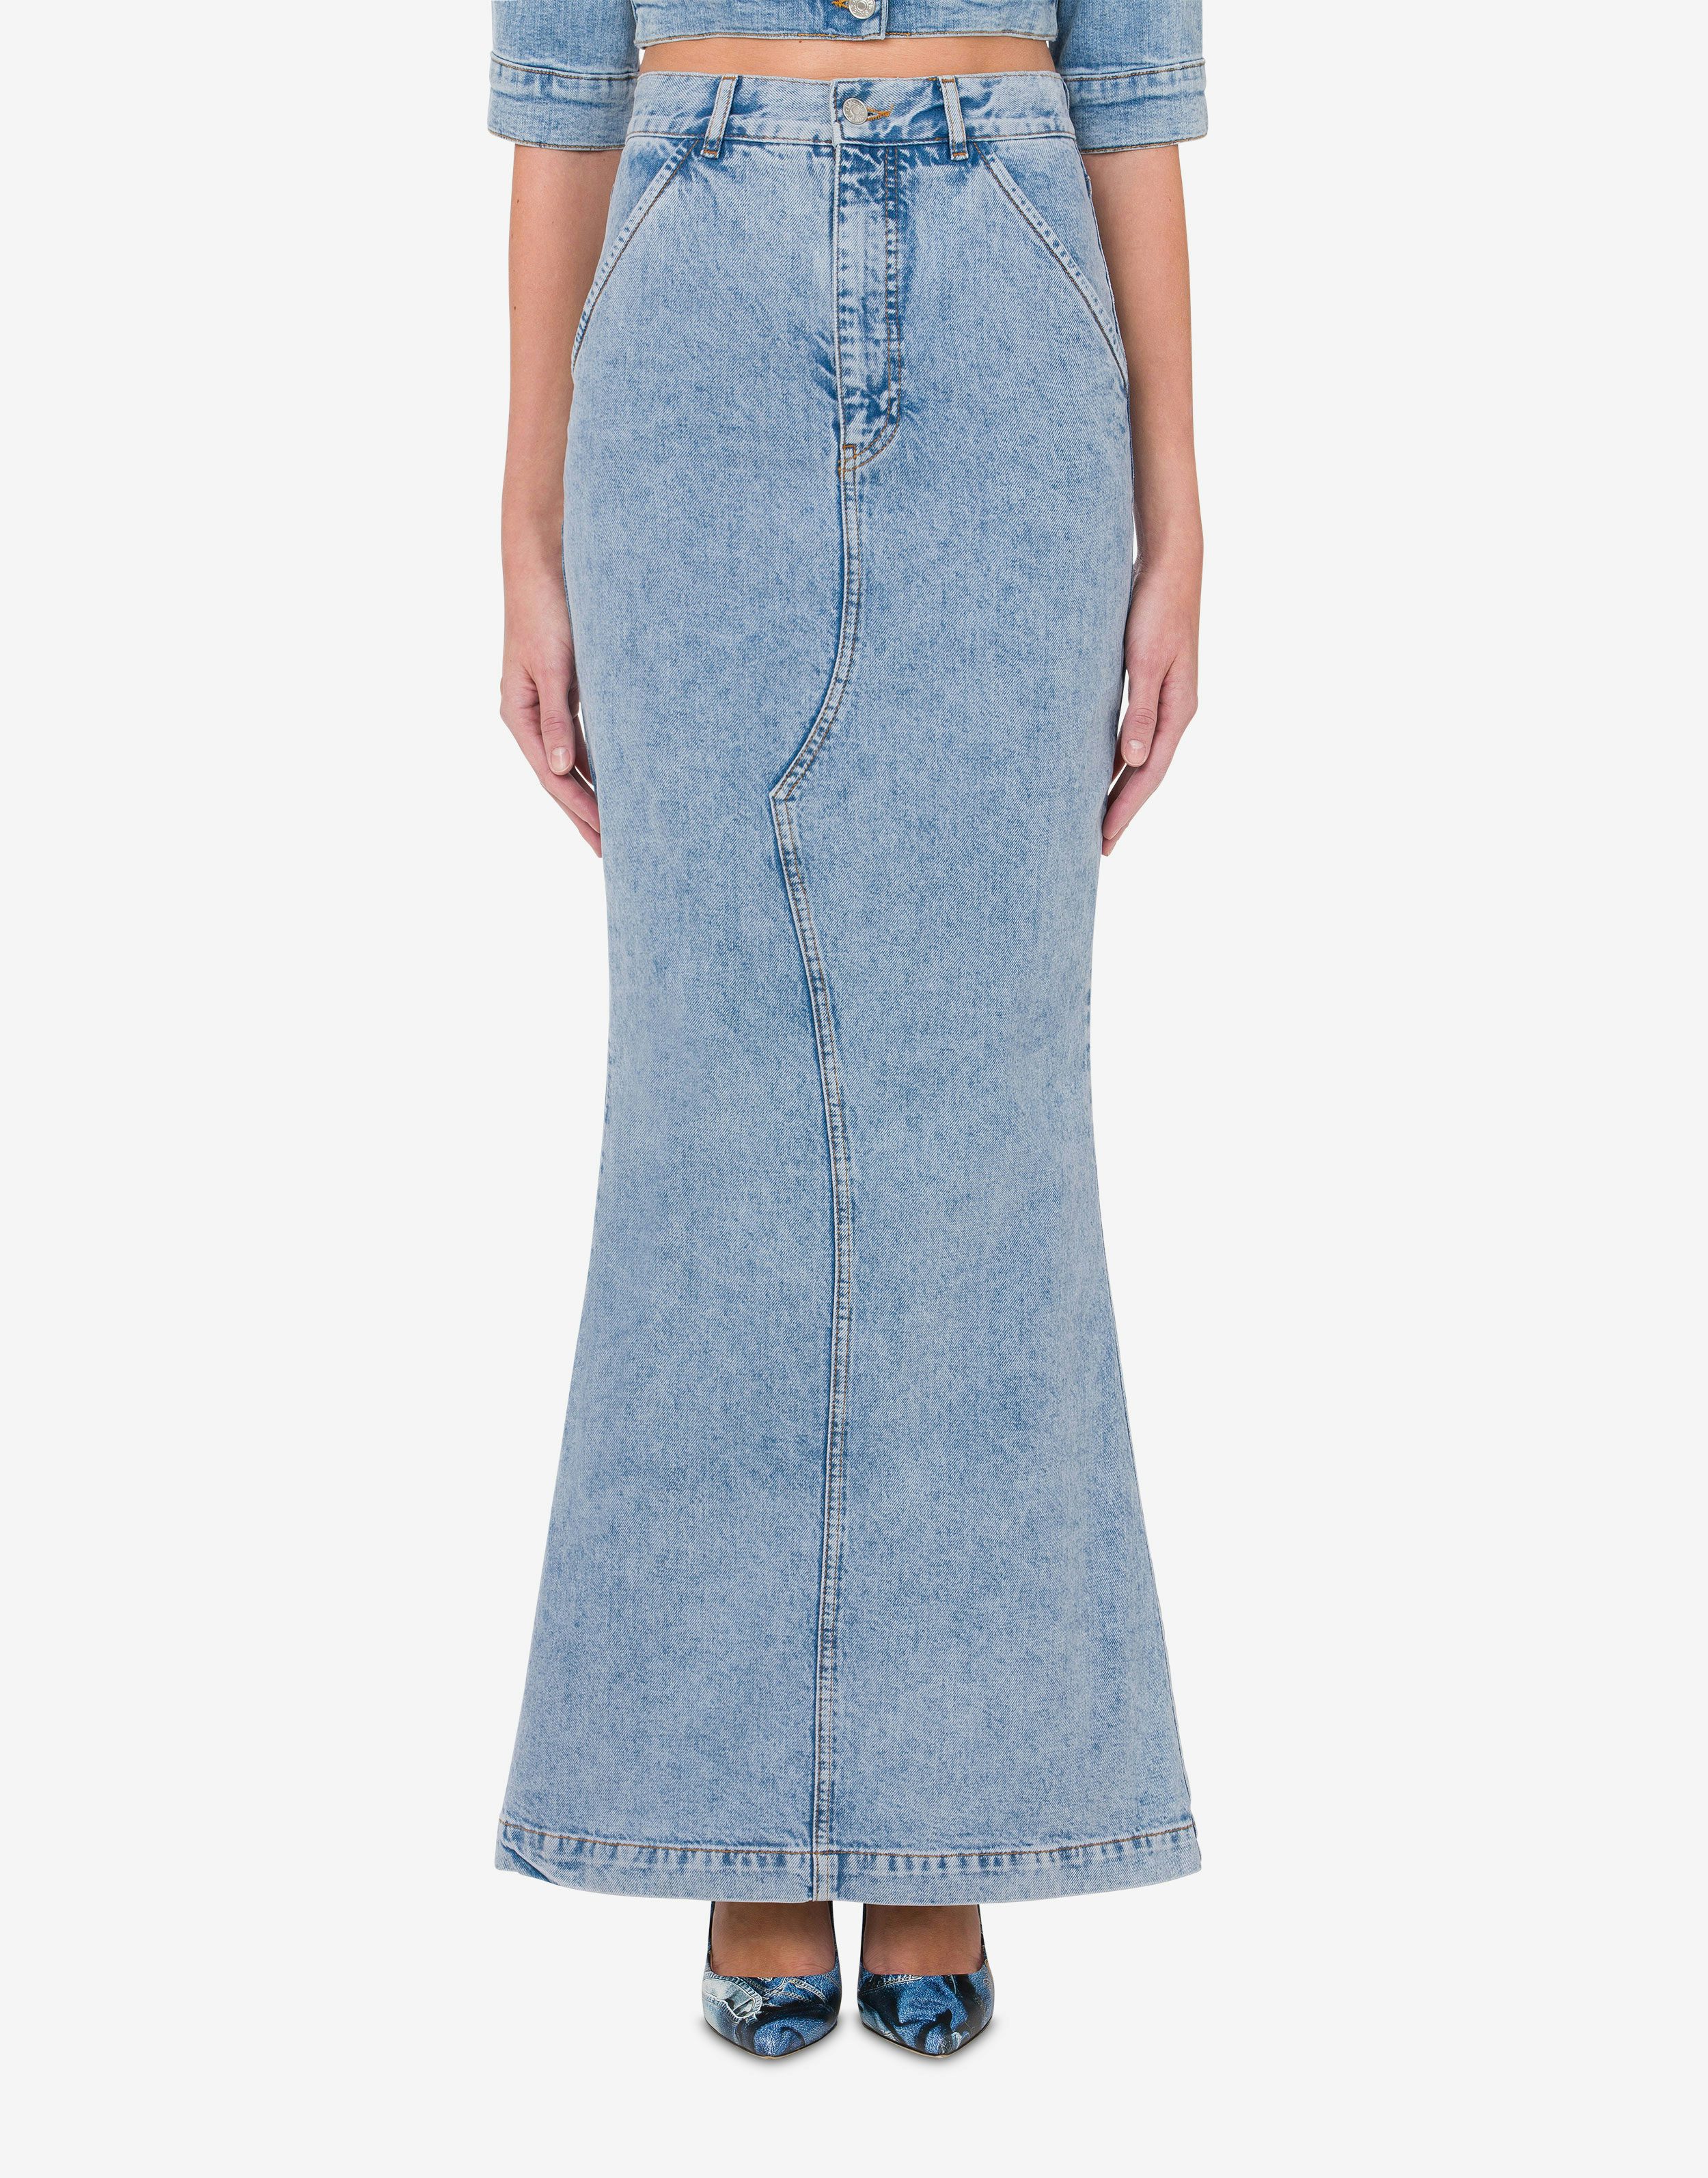 Recycled denim Store Official Moschino | skirt long